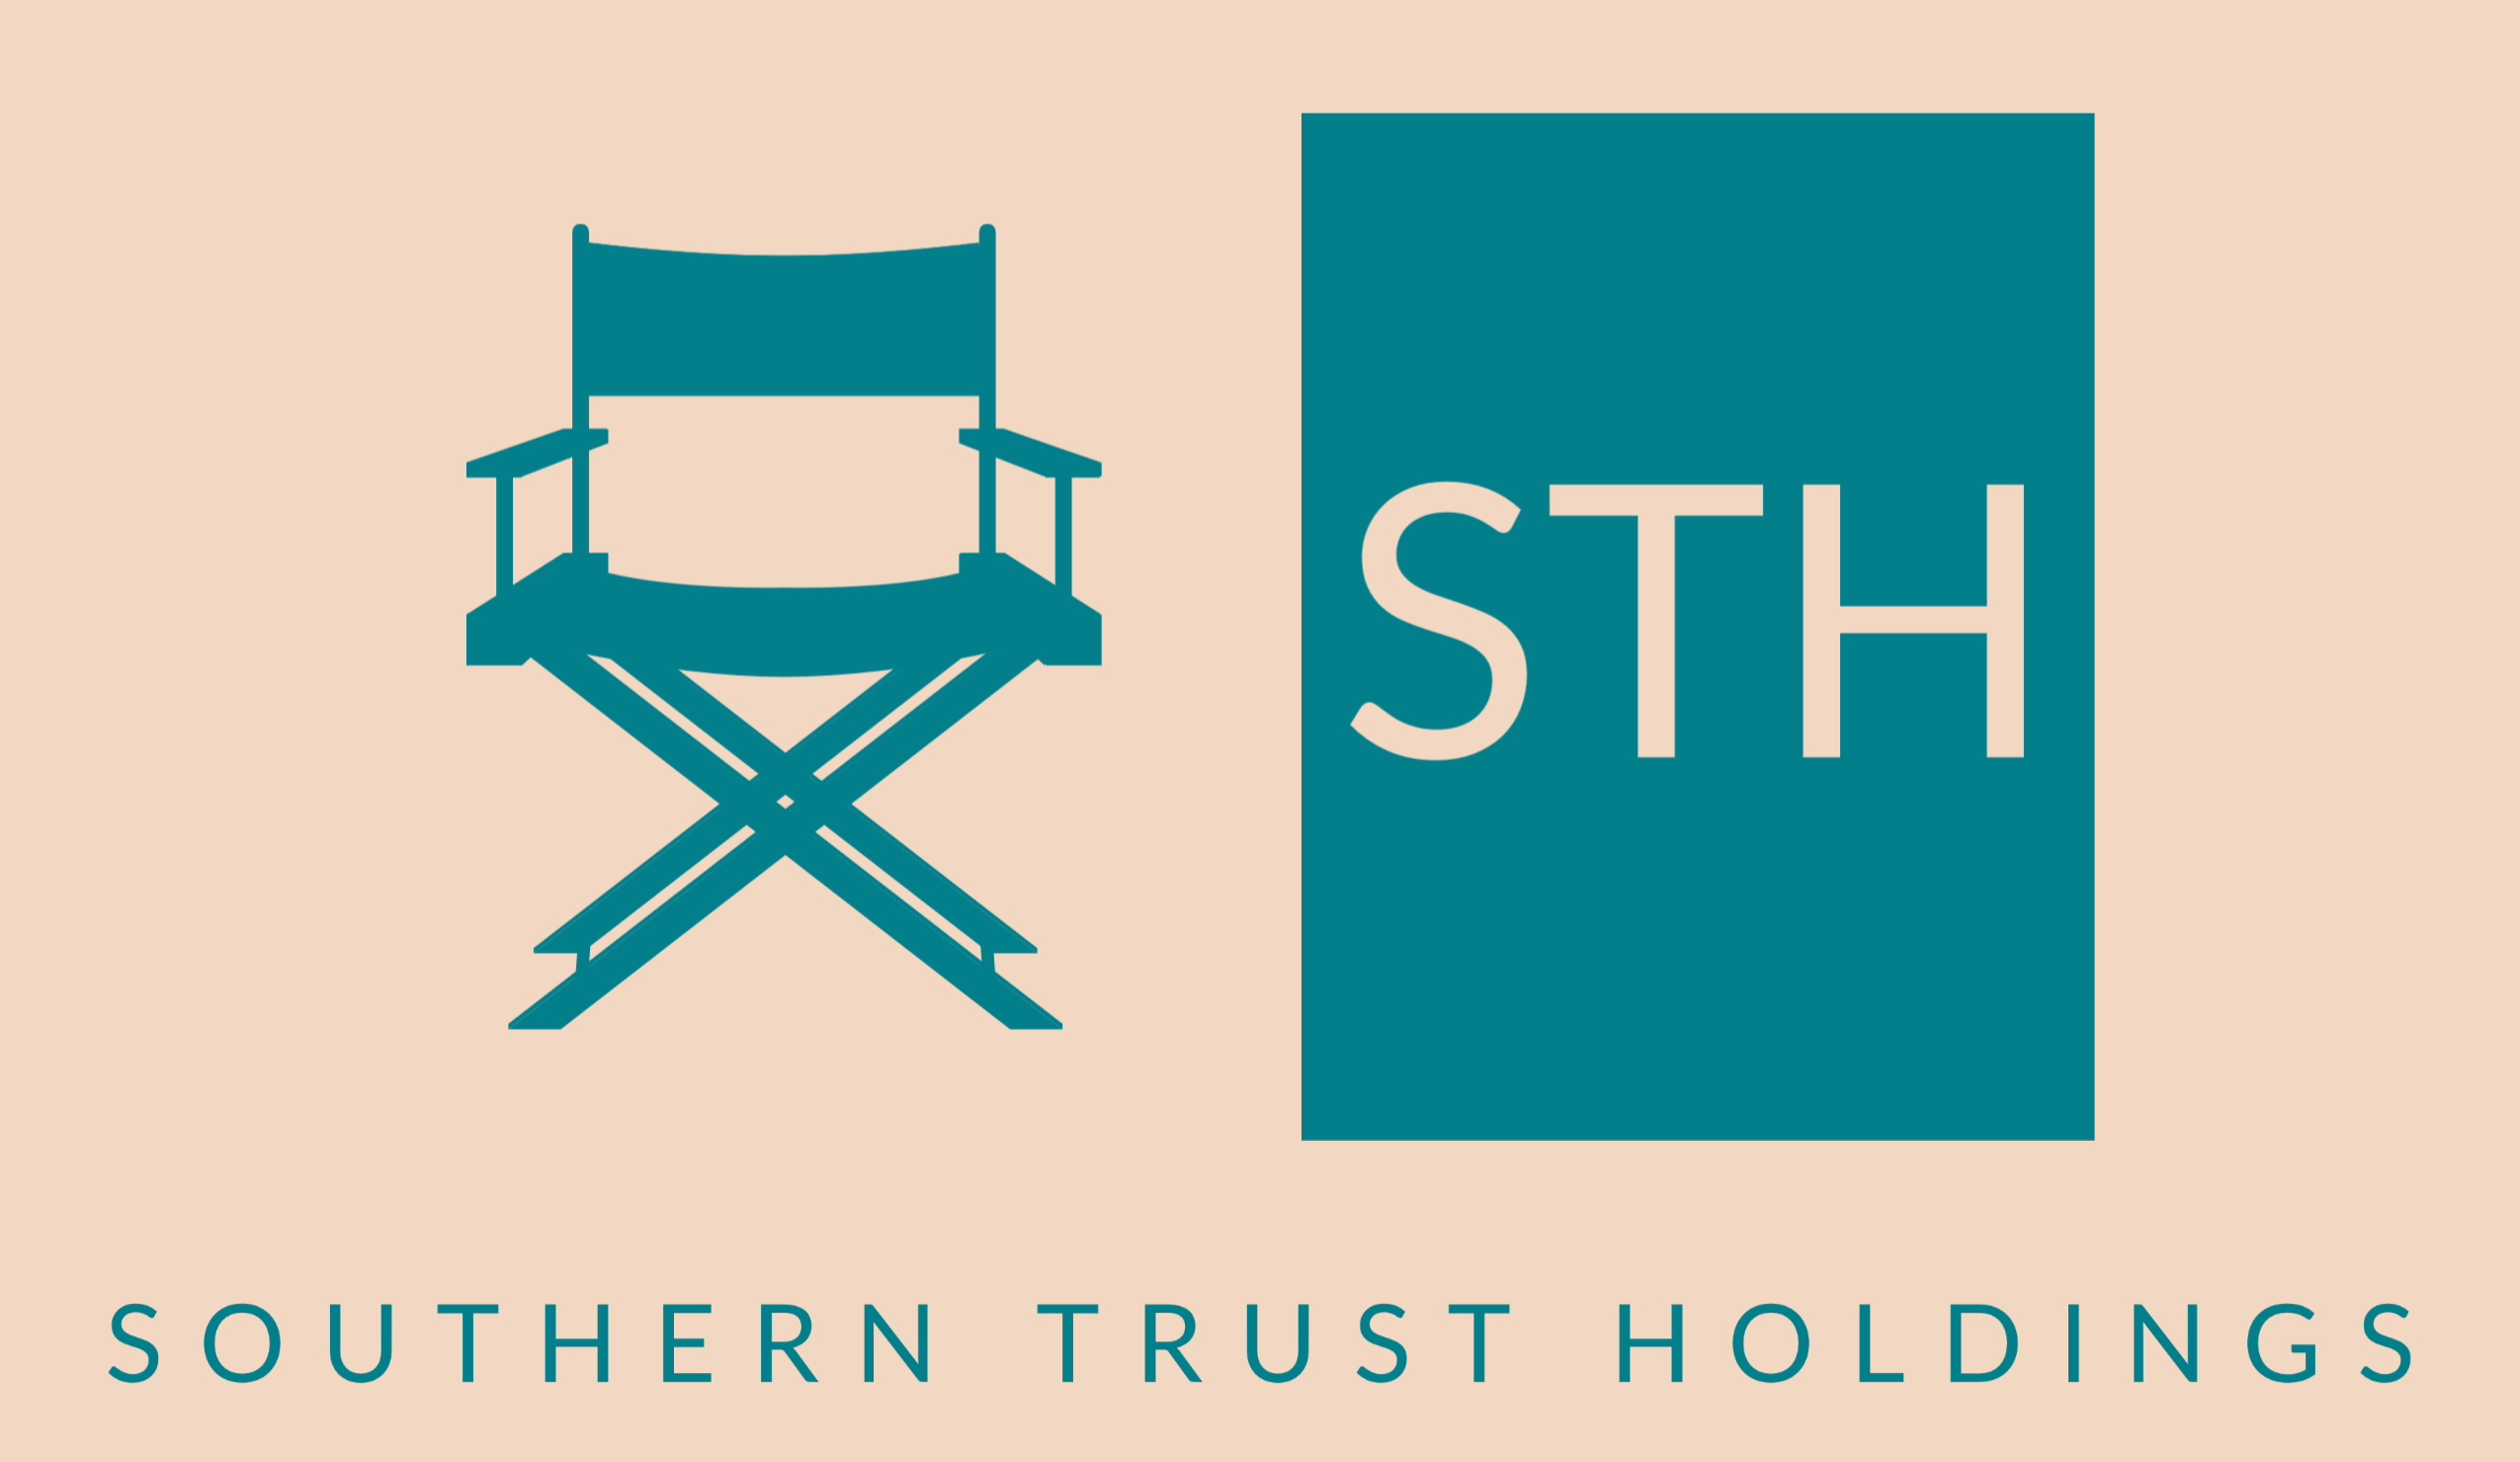 Southern Trust Holdings